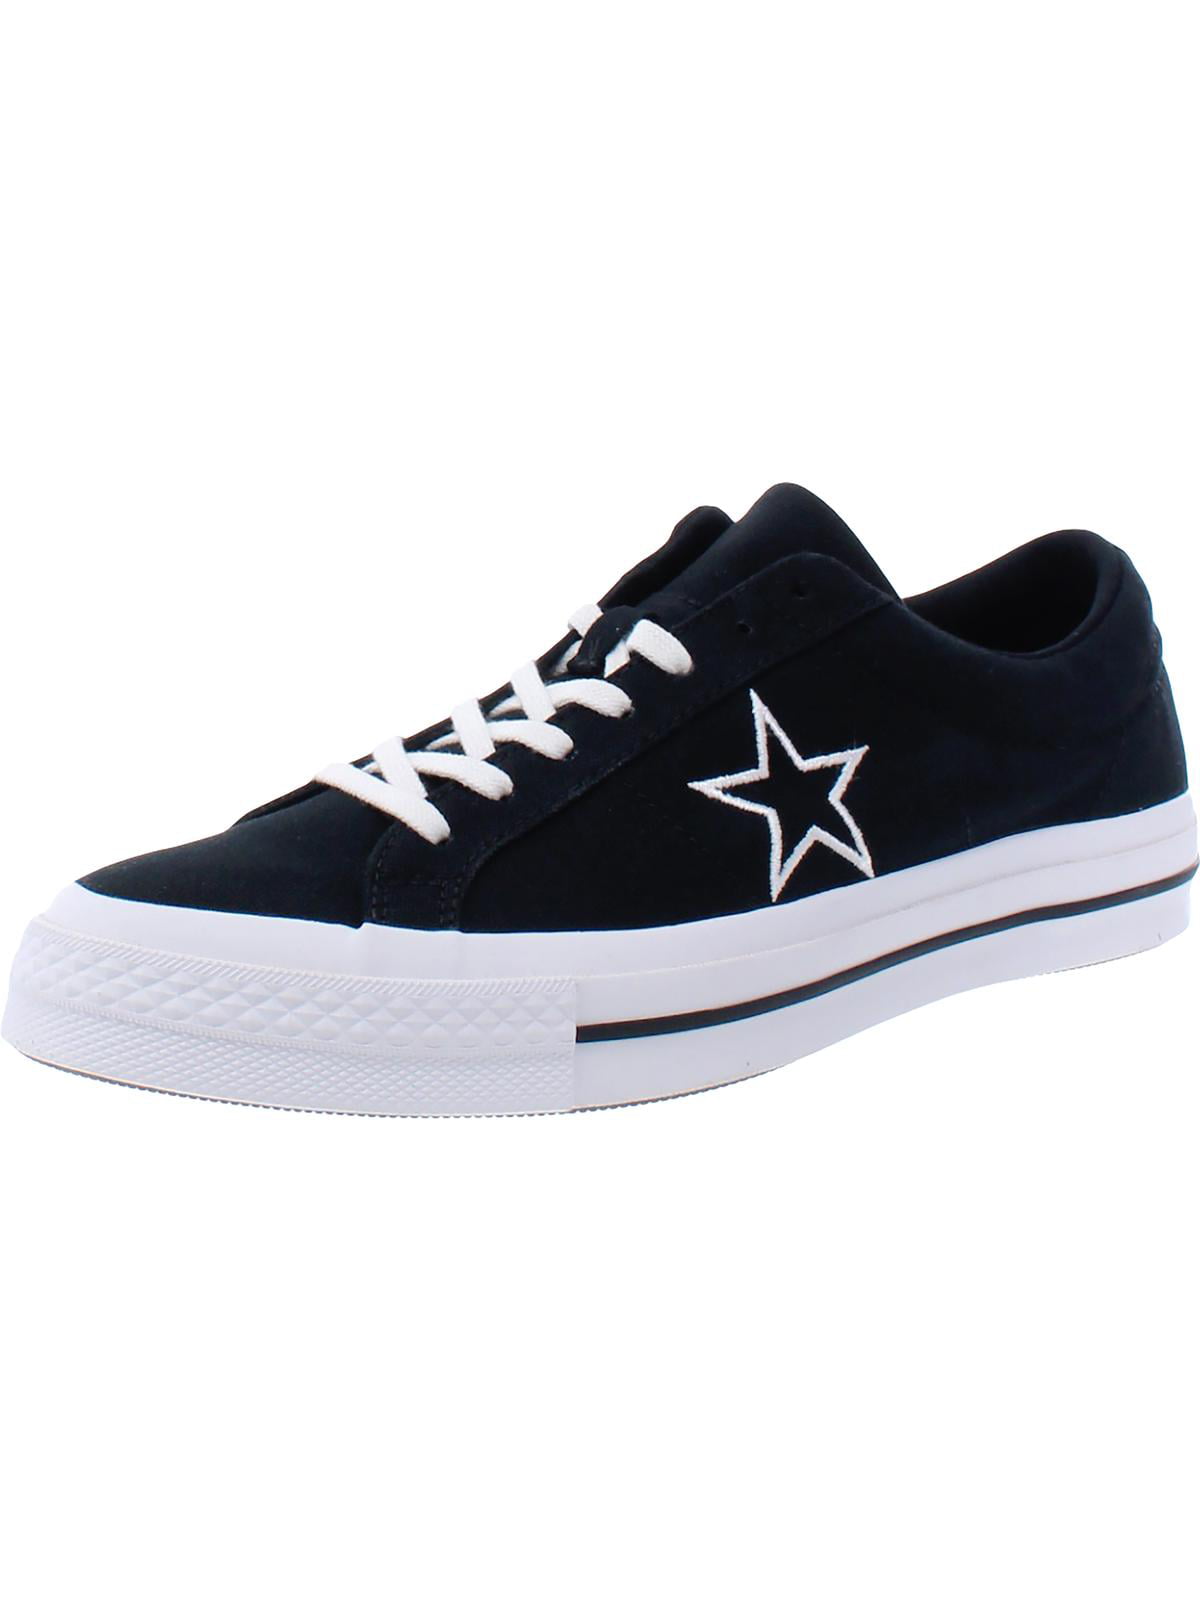 Converse Mens One Ox Canvas Top Fashion Sneakers -